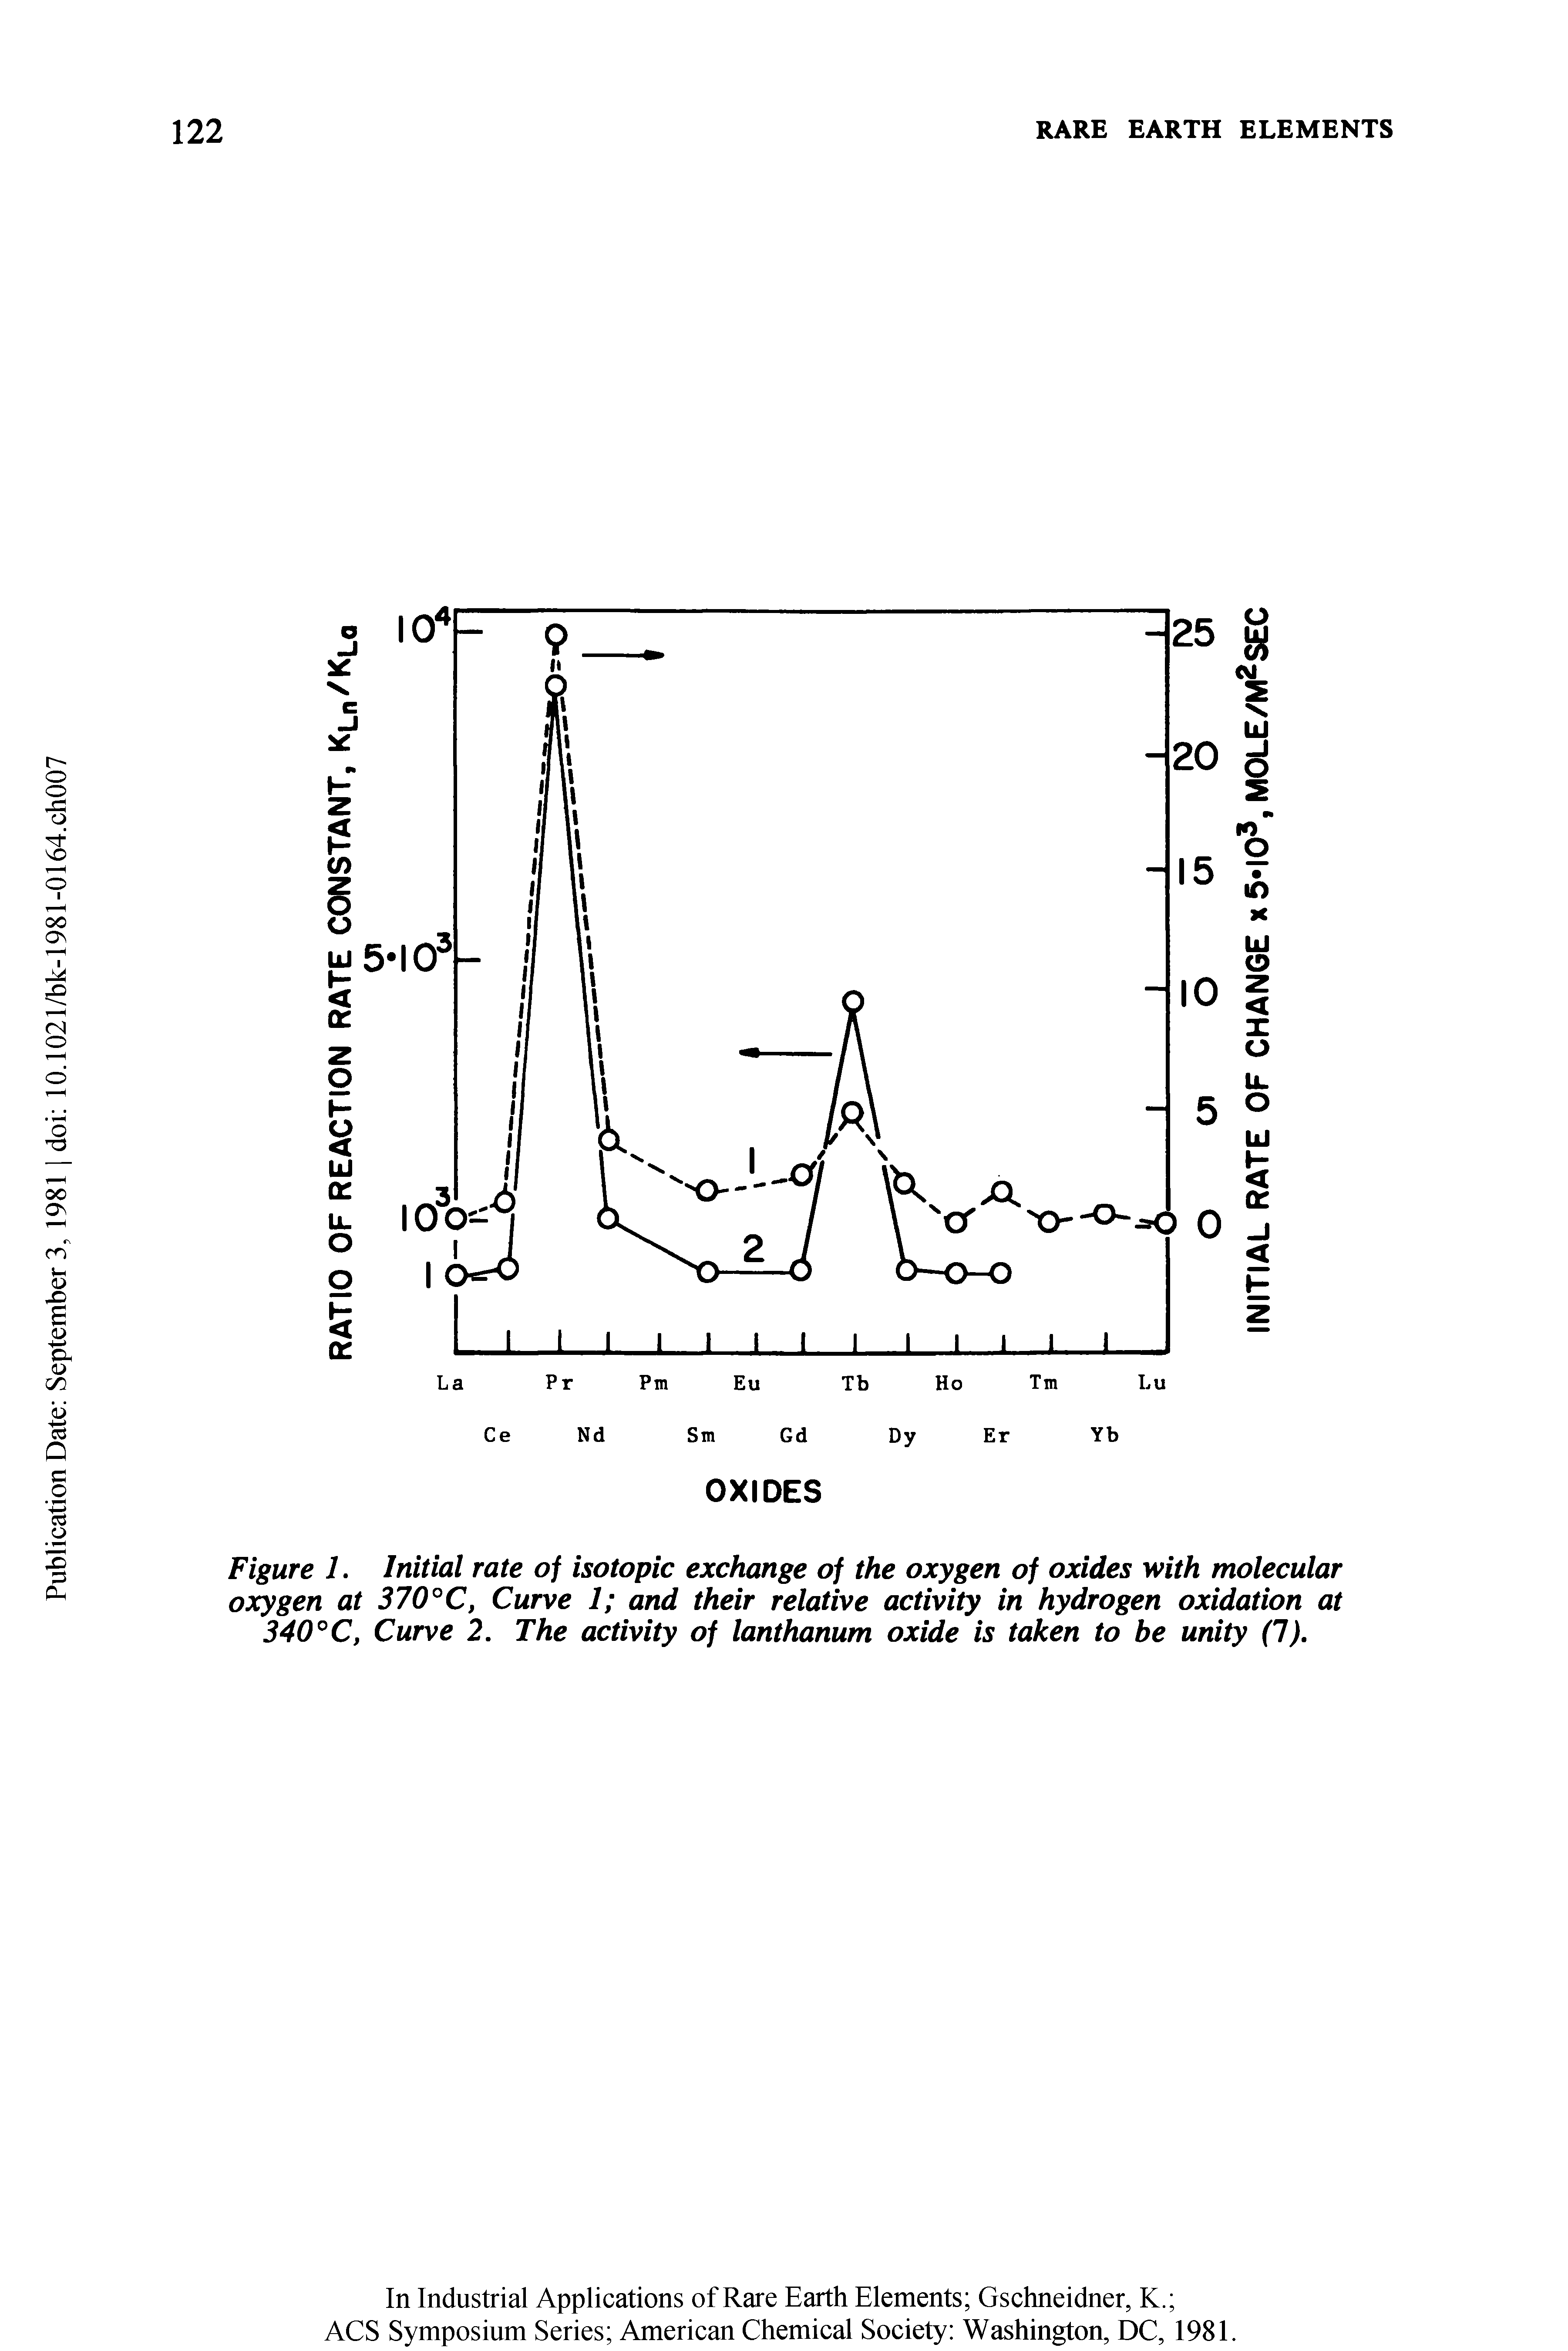 Figure 1. Initial rate of isotopic exchange of the oxygen of oxides with molecular oxygen at 370°C, Curve 1 and their relative activity in hydrogen oxidation at 340°C, Curve 2. The activity of lanthanum oxide is taken to be unity (1).